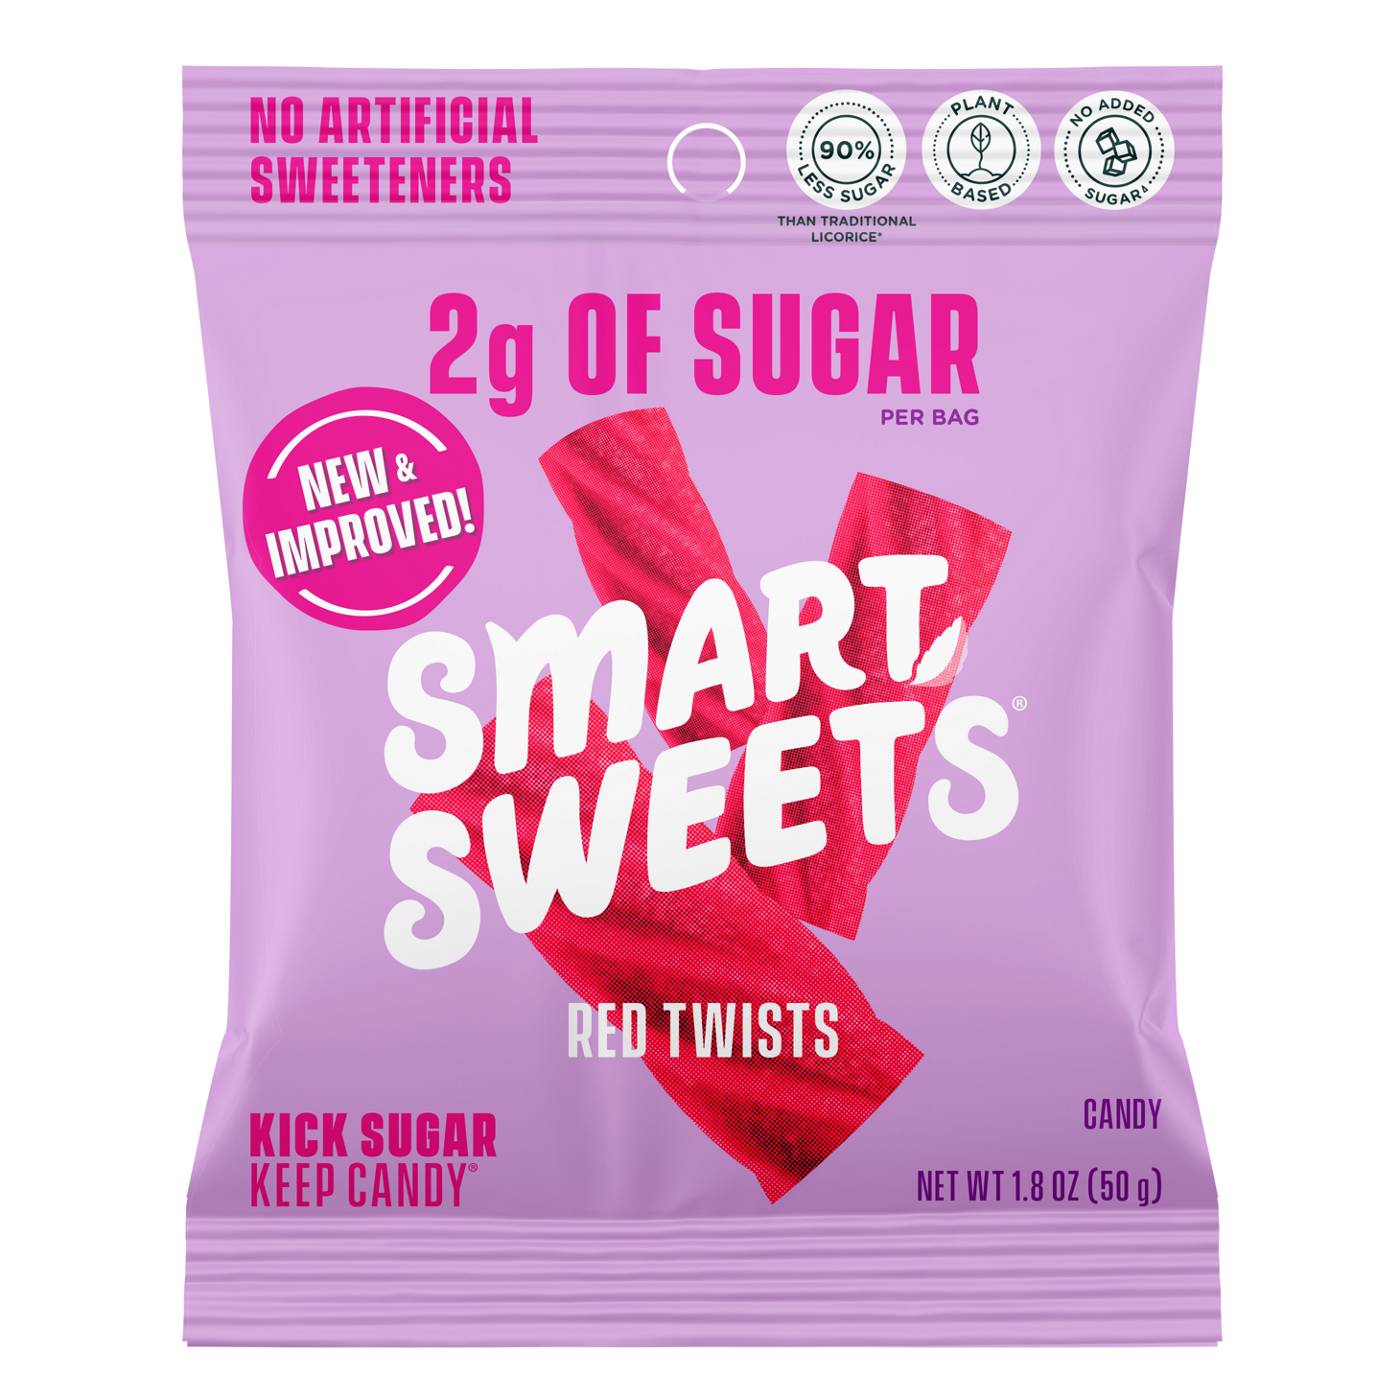 SmartSweets Red Twists Candy; image 1 of 3